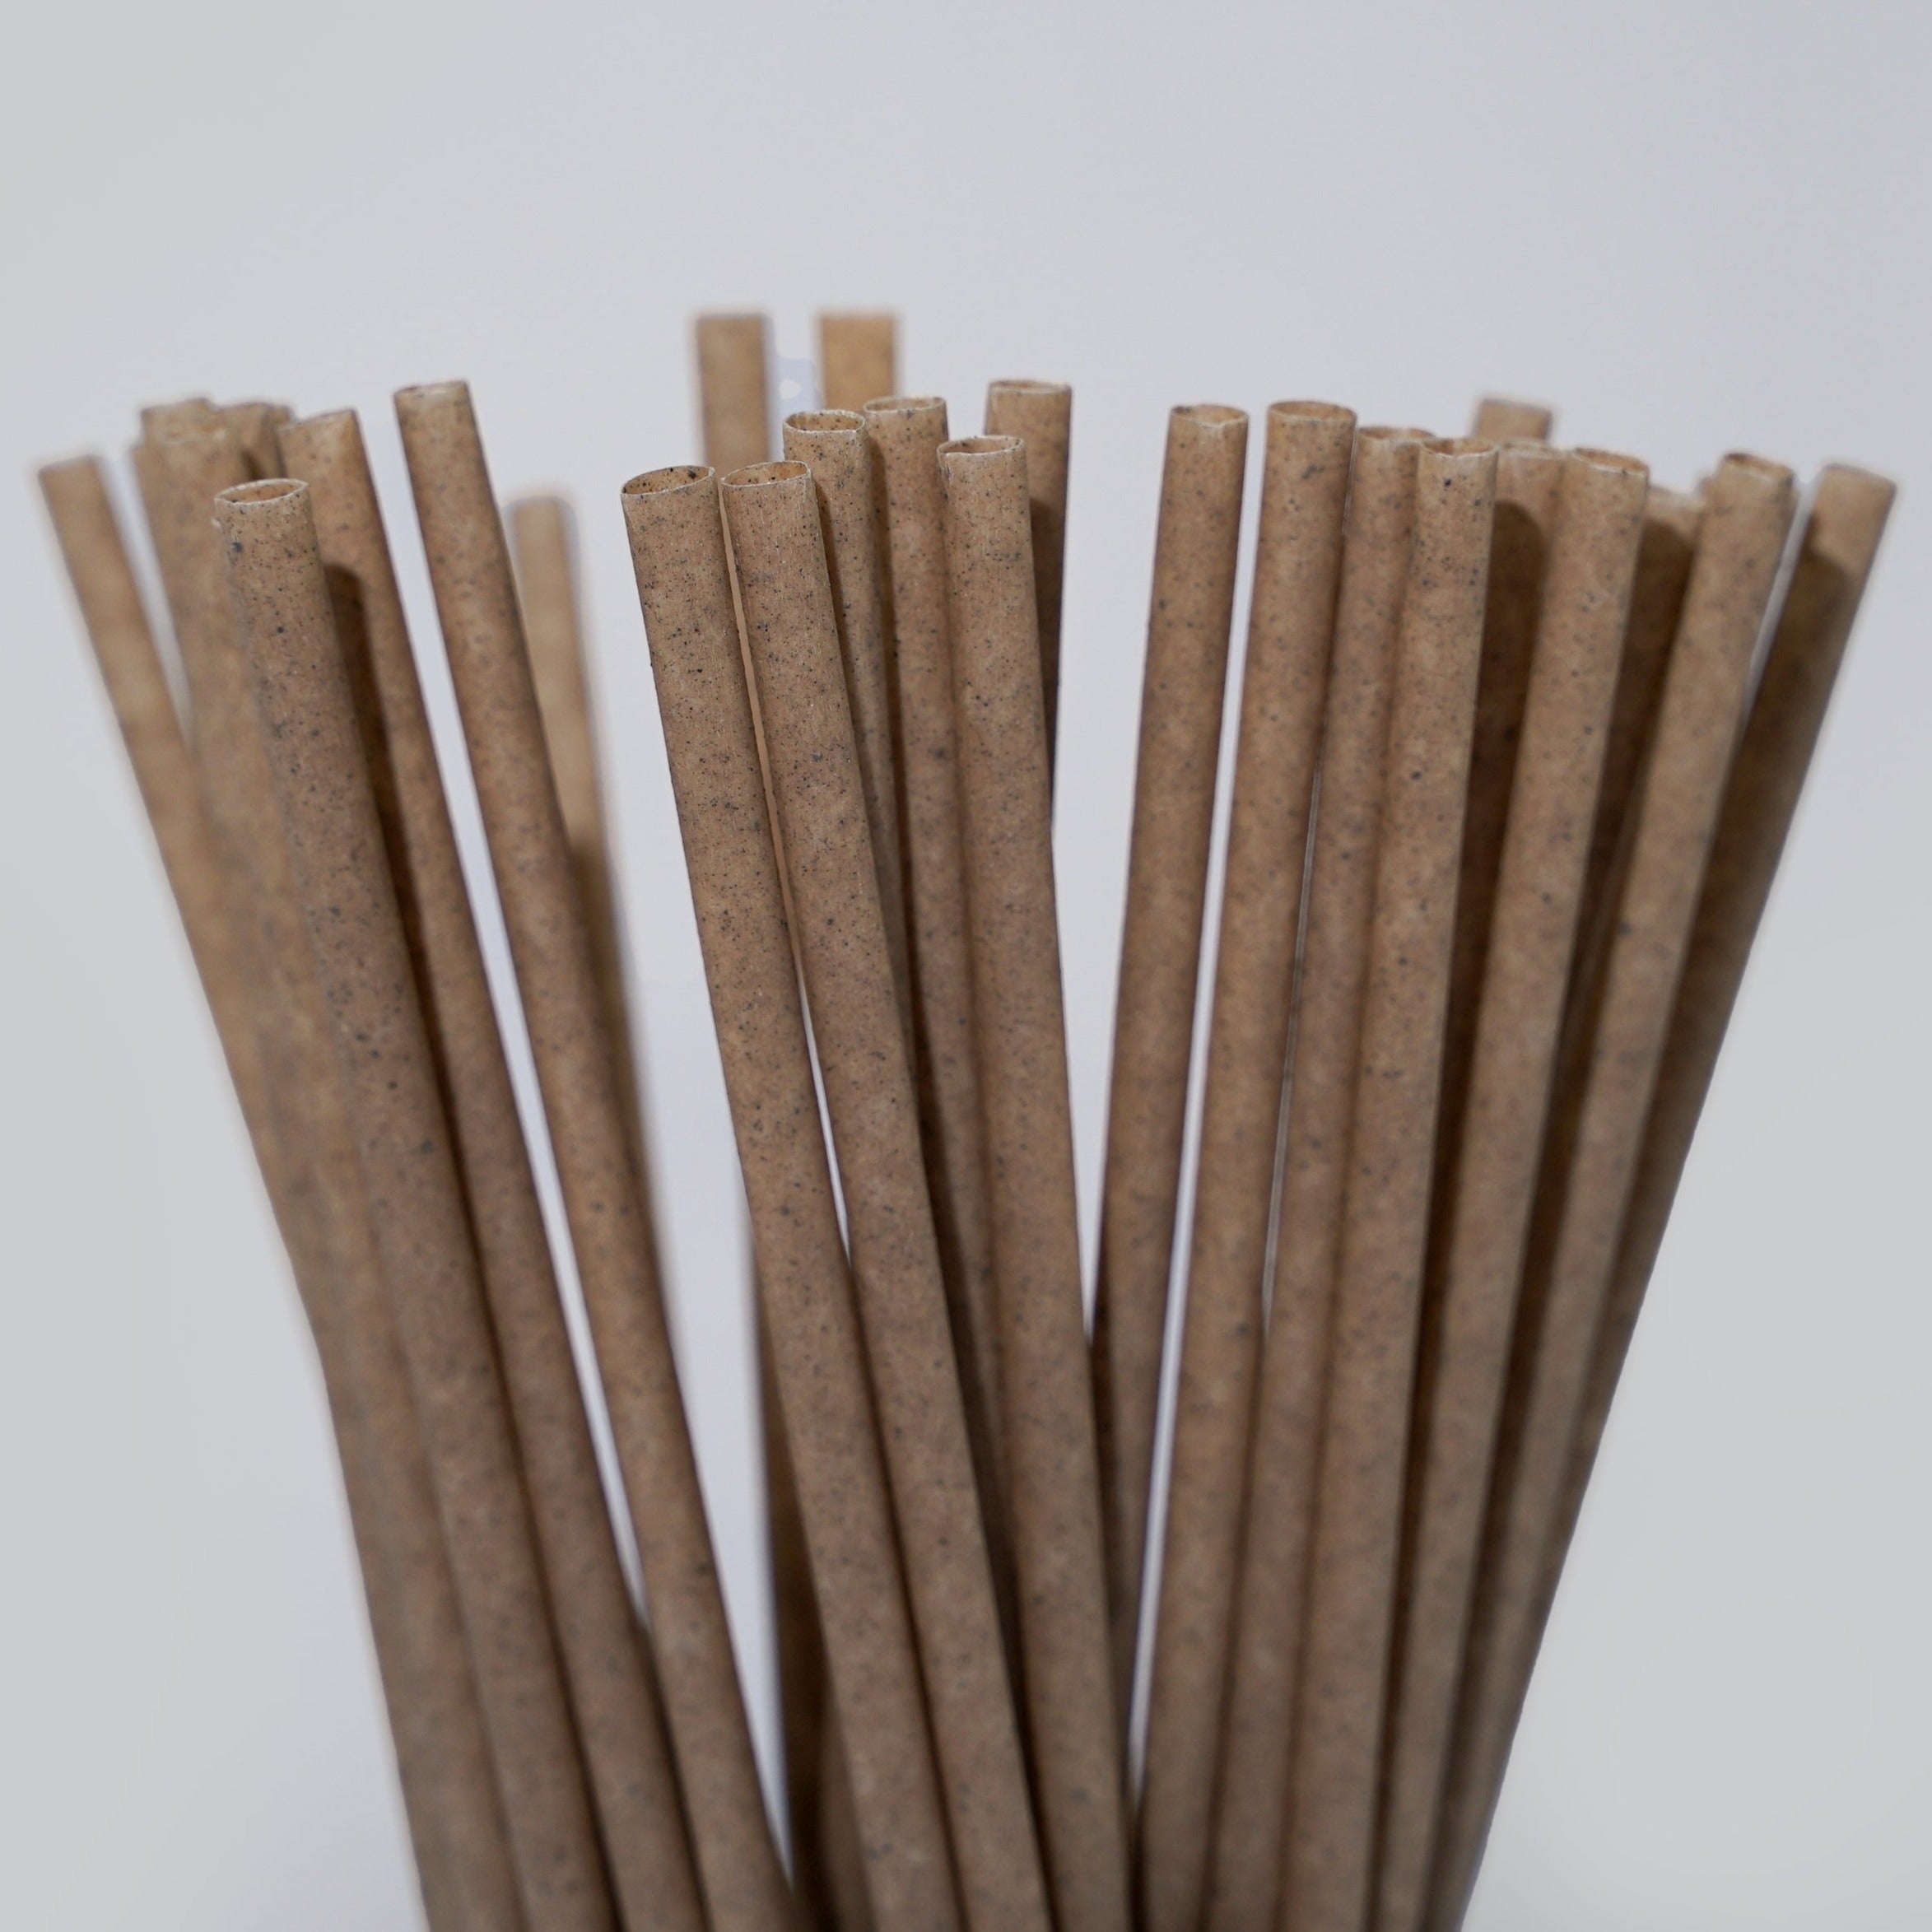 Coffee Drinking Straws (Wholesale/Bulk), Standard Size - 1000 count by EQUO